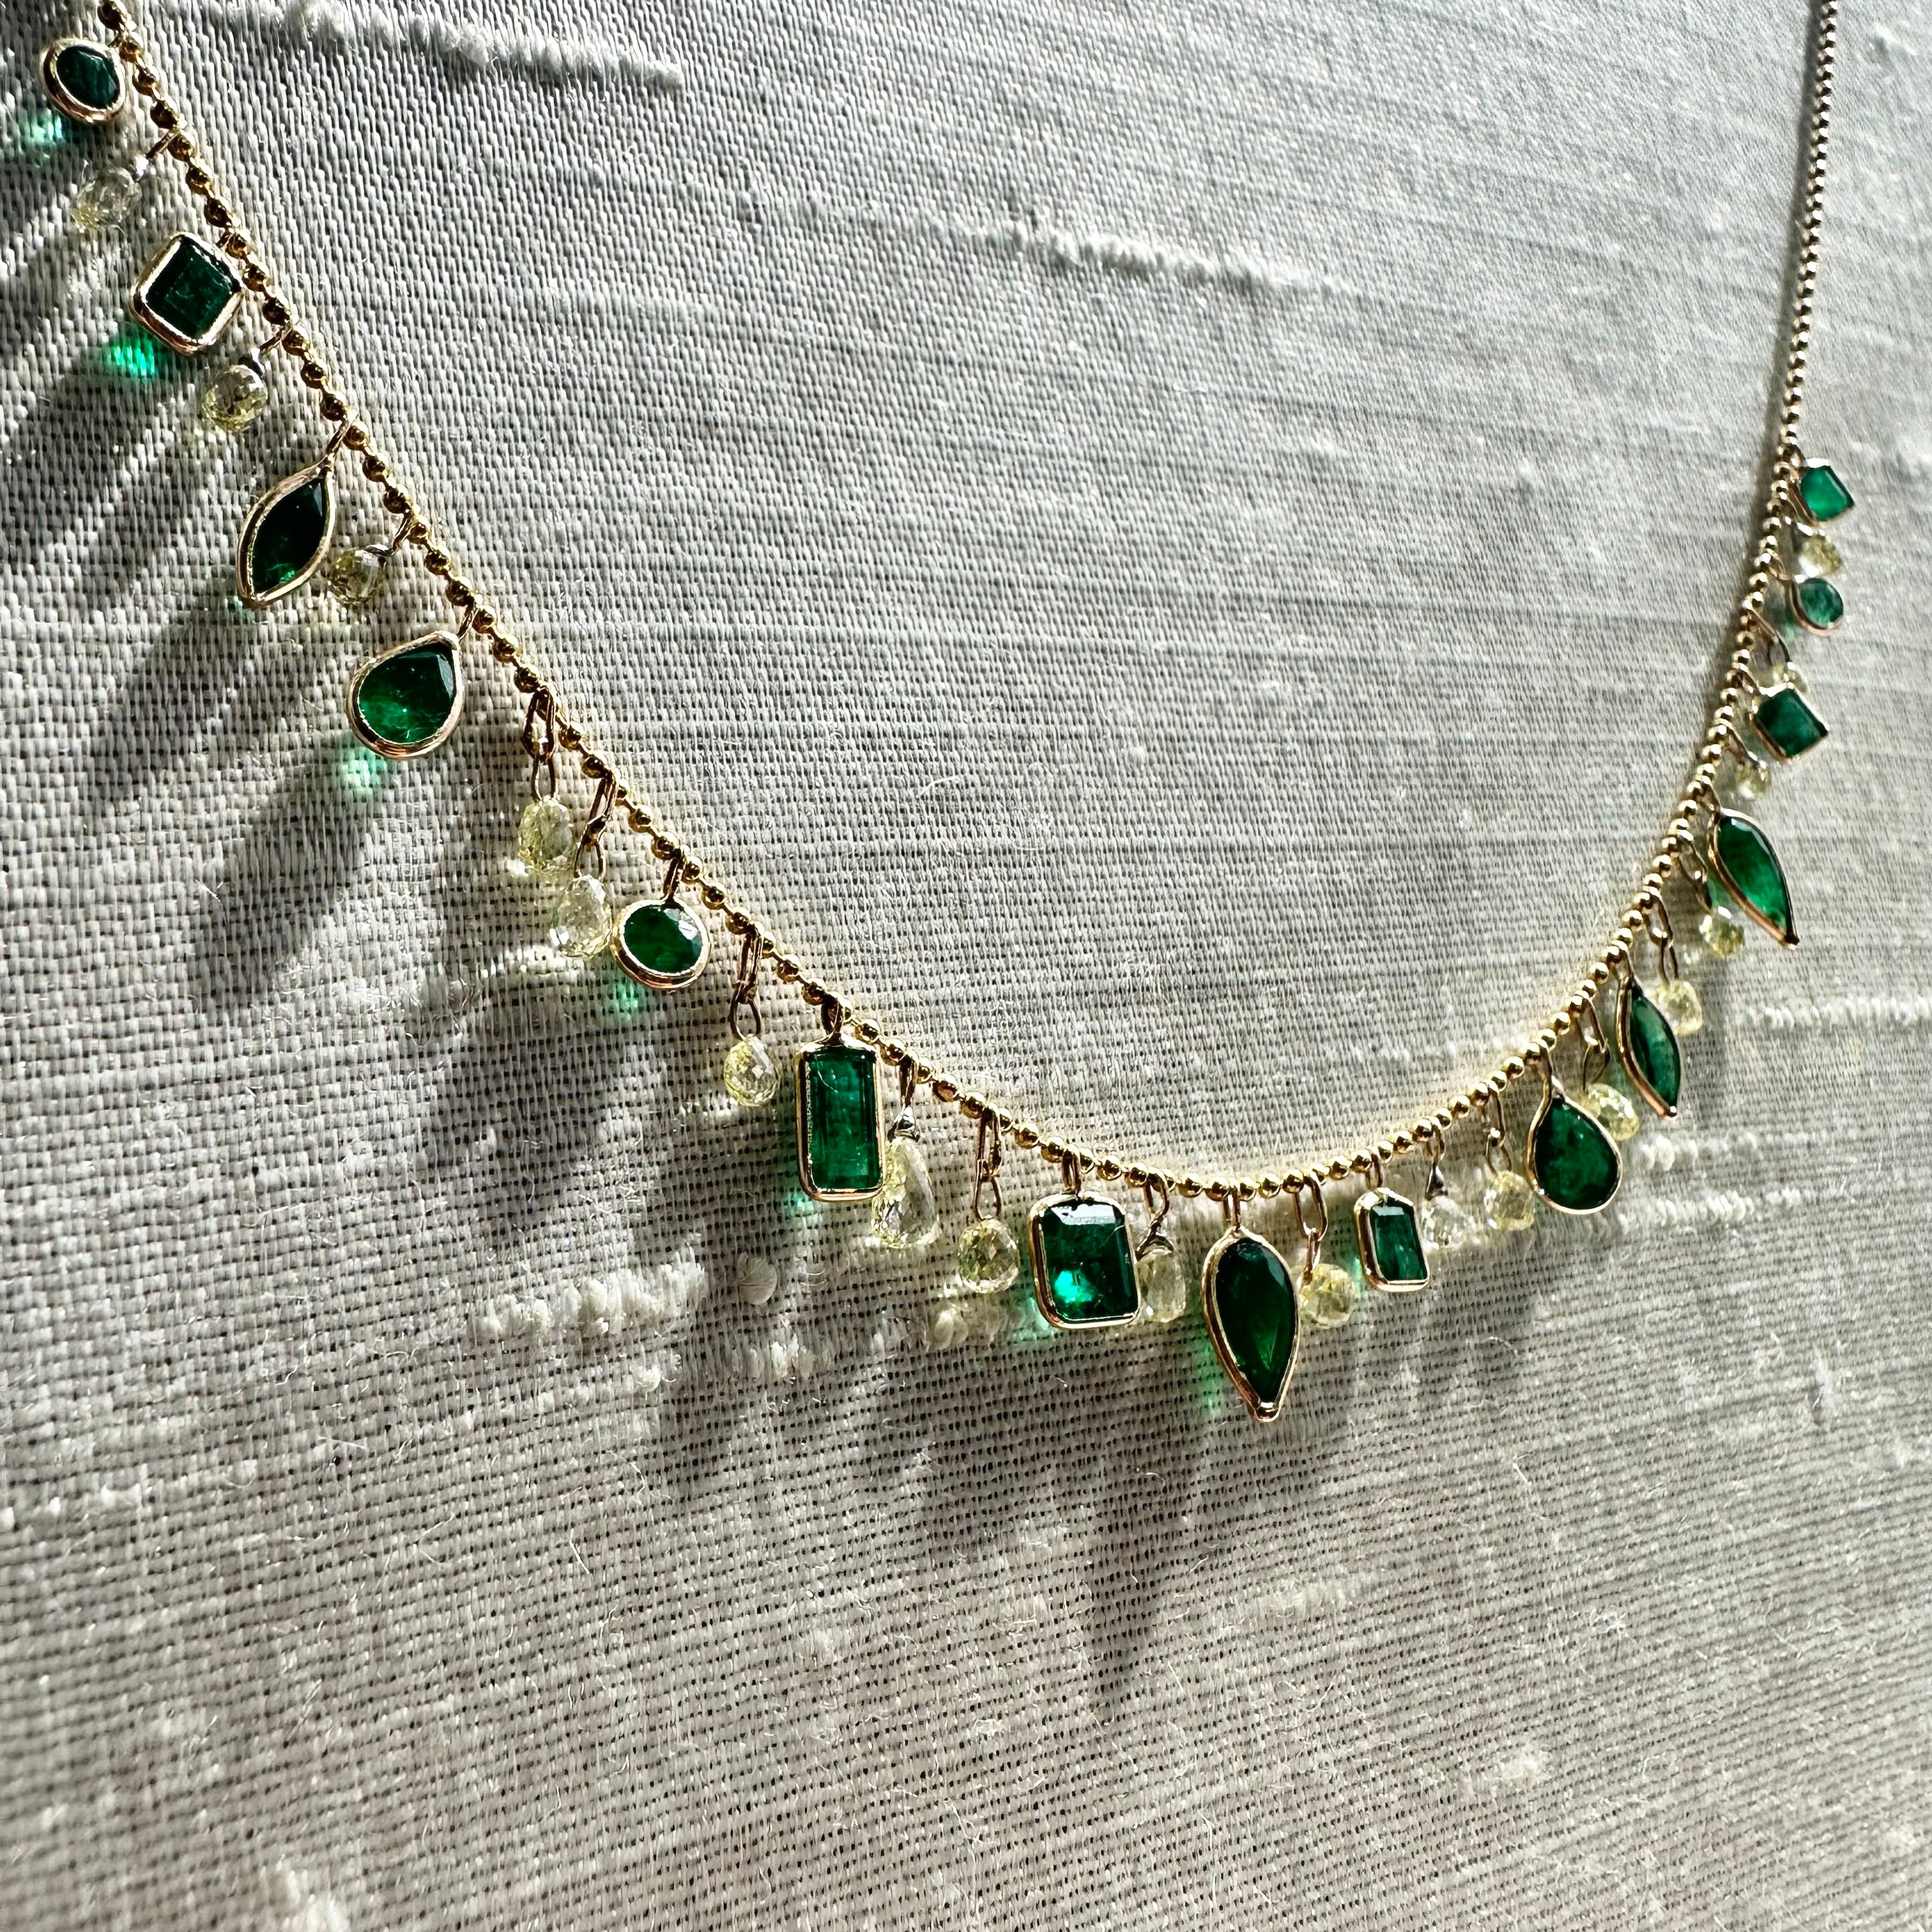 14K 16" Yellow Gold With Dangling Diamonds & Emeralds With All Different Shapes